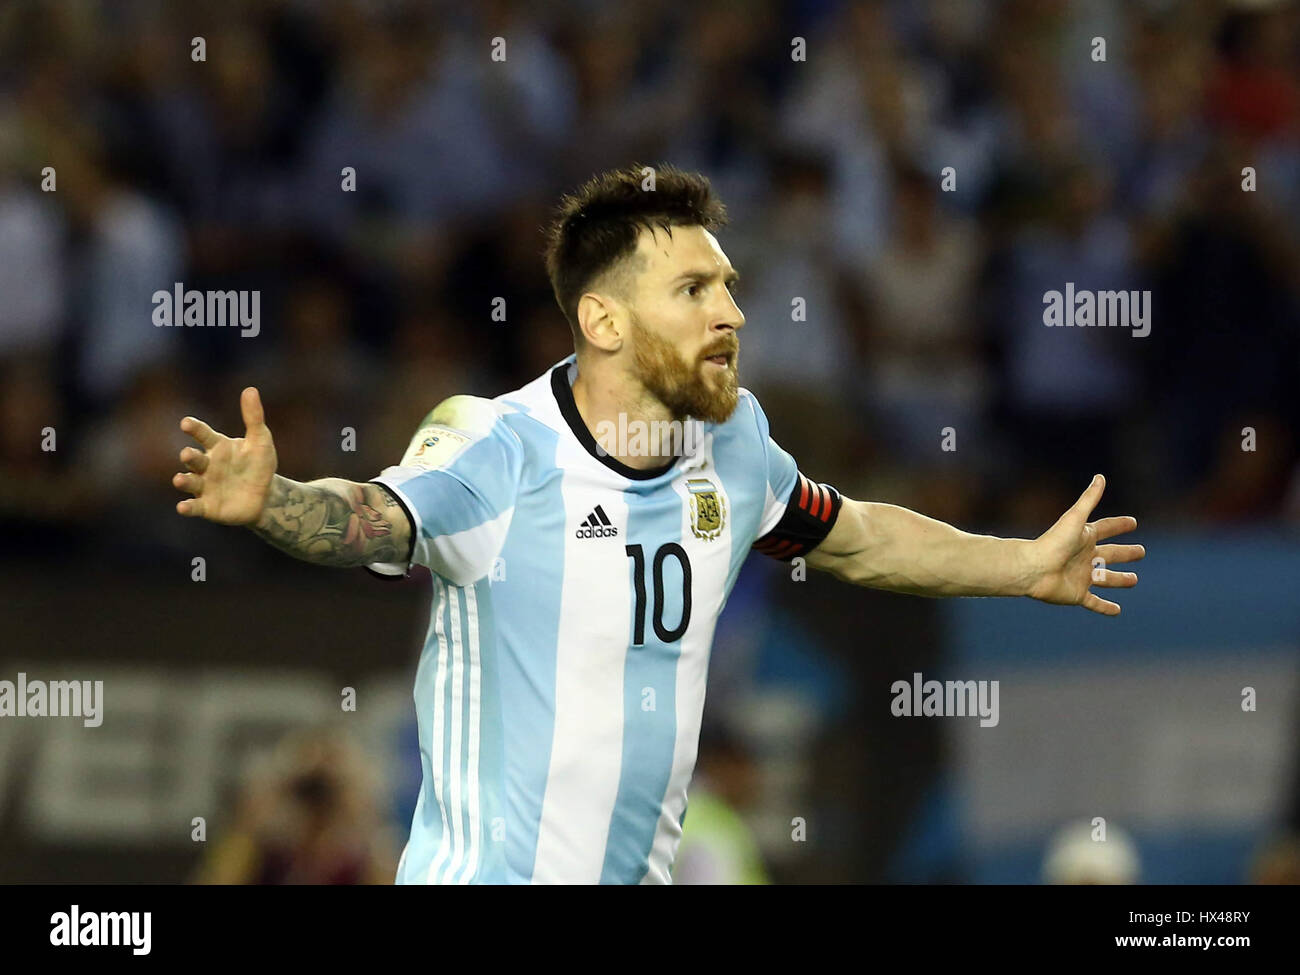 BUENOS AIRES, ARGENTINA - MARCH 23: Lionel Messi celebrates after scoring his team's first goal during a match between Argentina and Chile as part of FIFA 2018 World Cup Qualifiers at Monumental Stadium on March 23, 2017 in Buenos Aires, Argentina.  Photo: Cronos/Diener Stock Photo